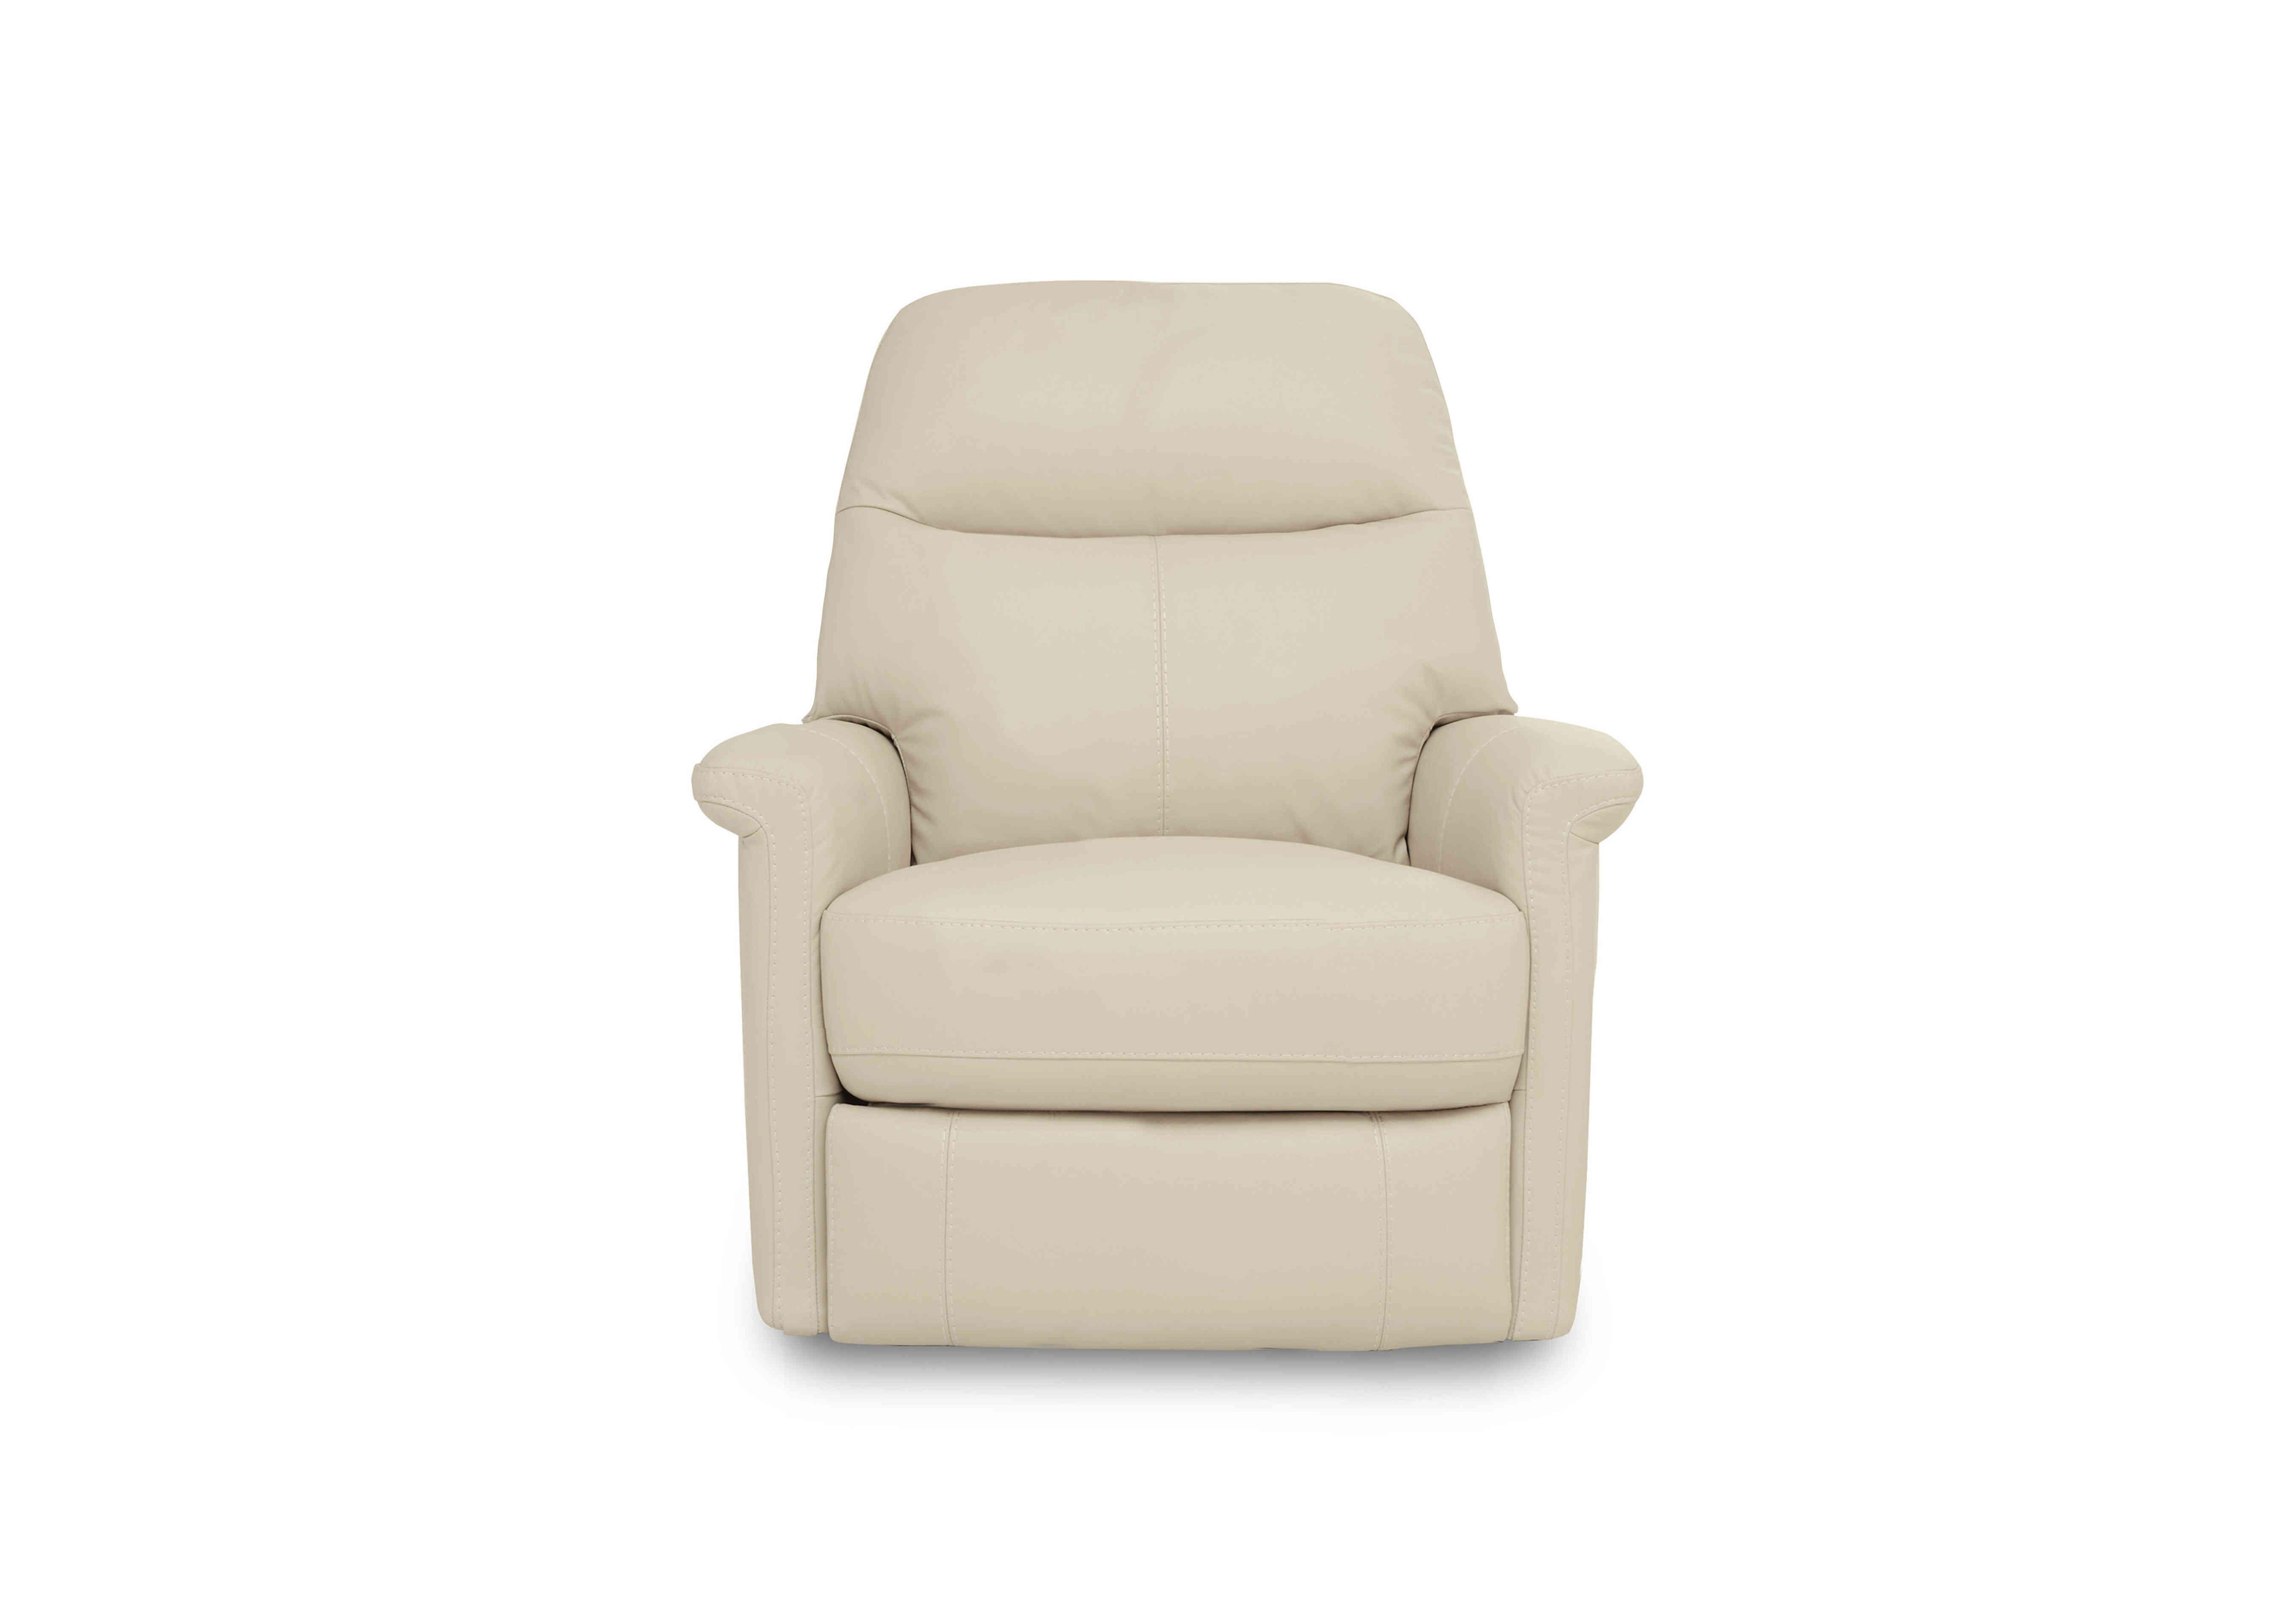 Compact Collection Lille Leather Rocker Swivel Chair with Power Recliner in Bv-862c Bisque on Furniture Village